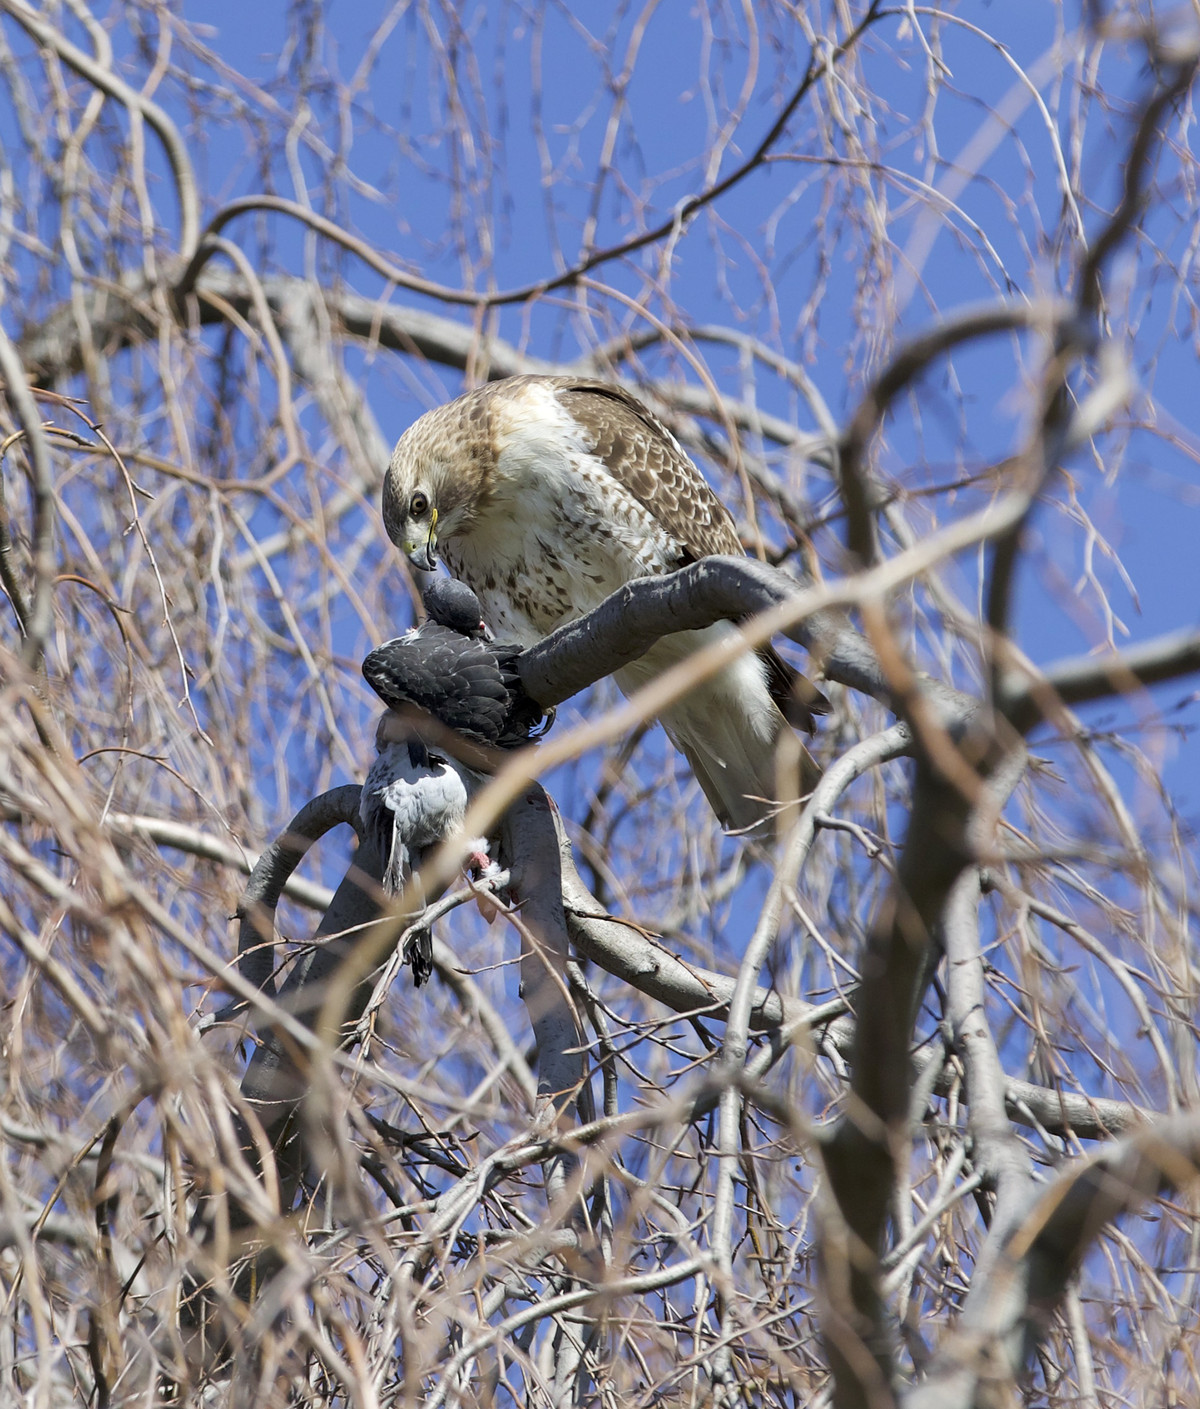 A hawk perched in a tangle of branches in a tree eats from a dead pigeon held in its talons.